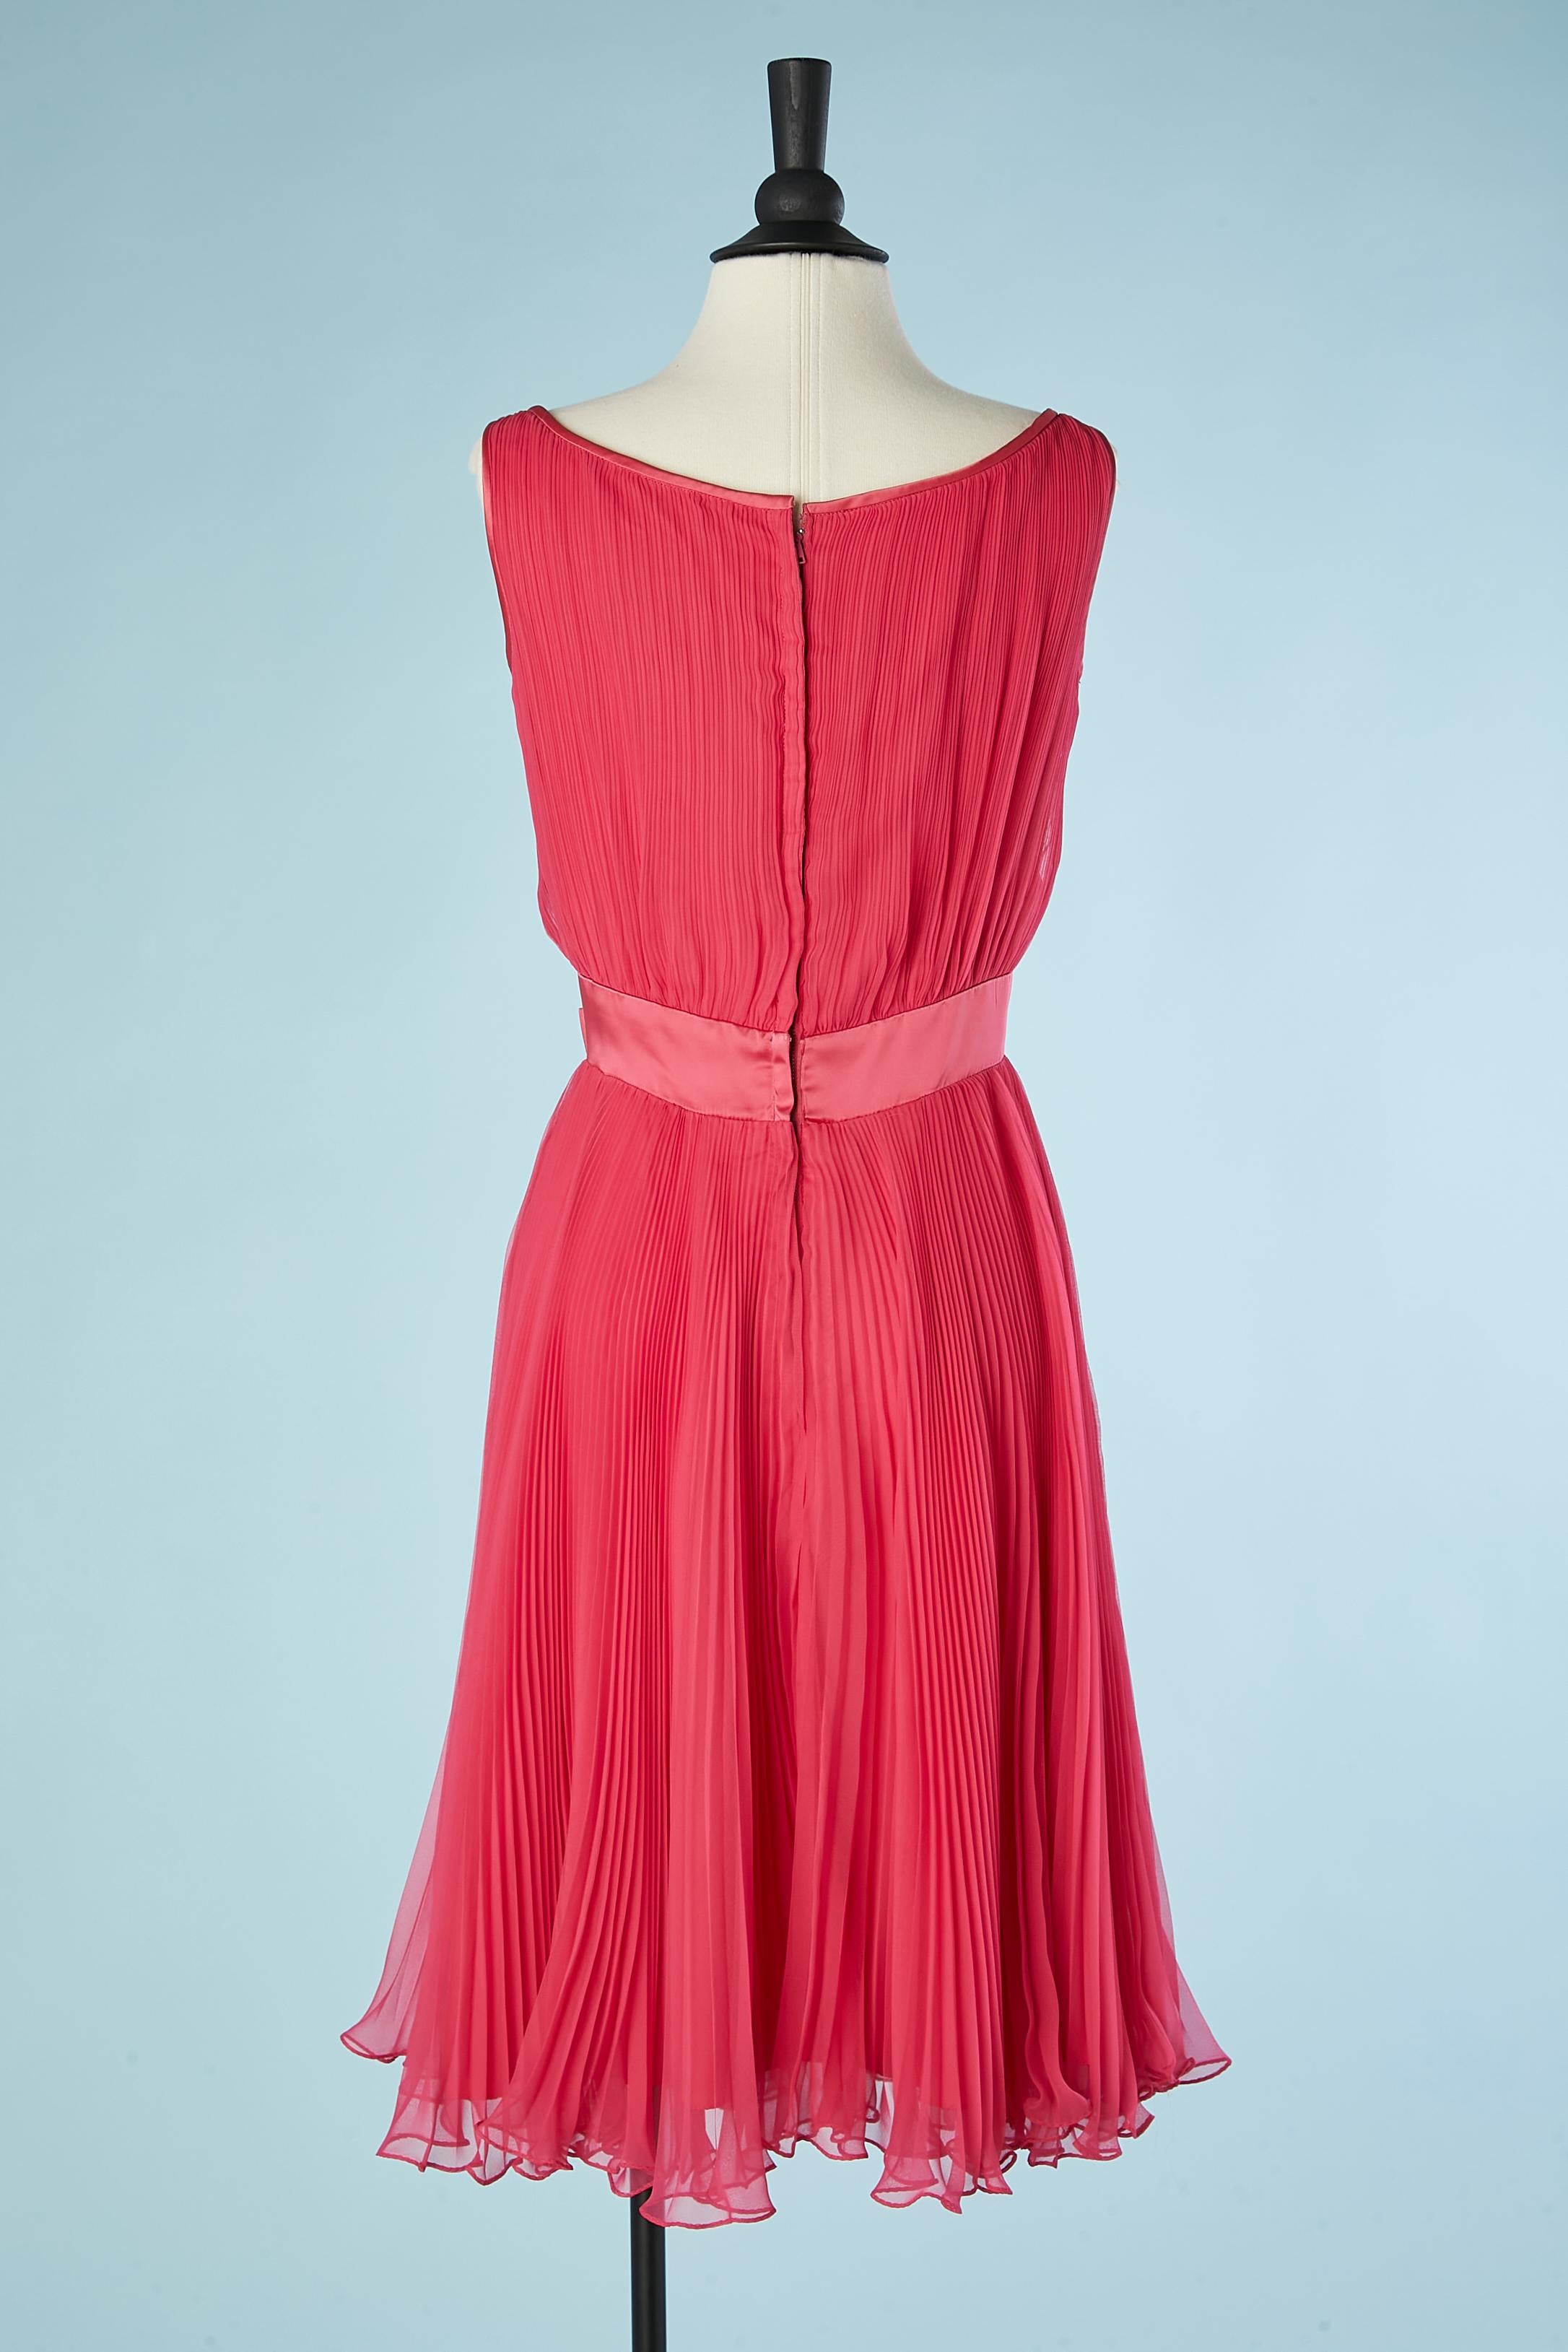 Sunray pleated pink cocktail dress with bow  Miss Eliette Circa 1960's  For Sale 1